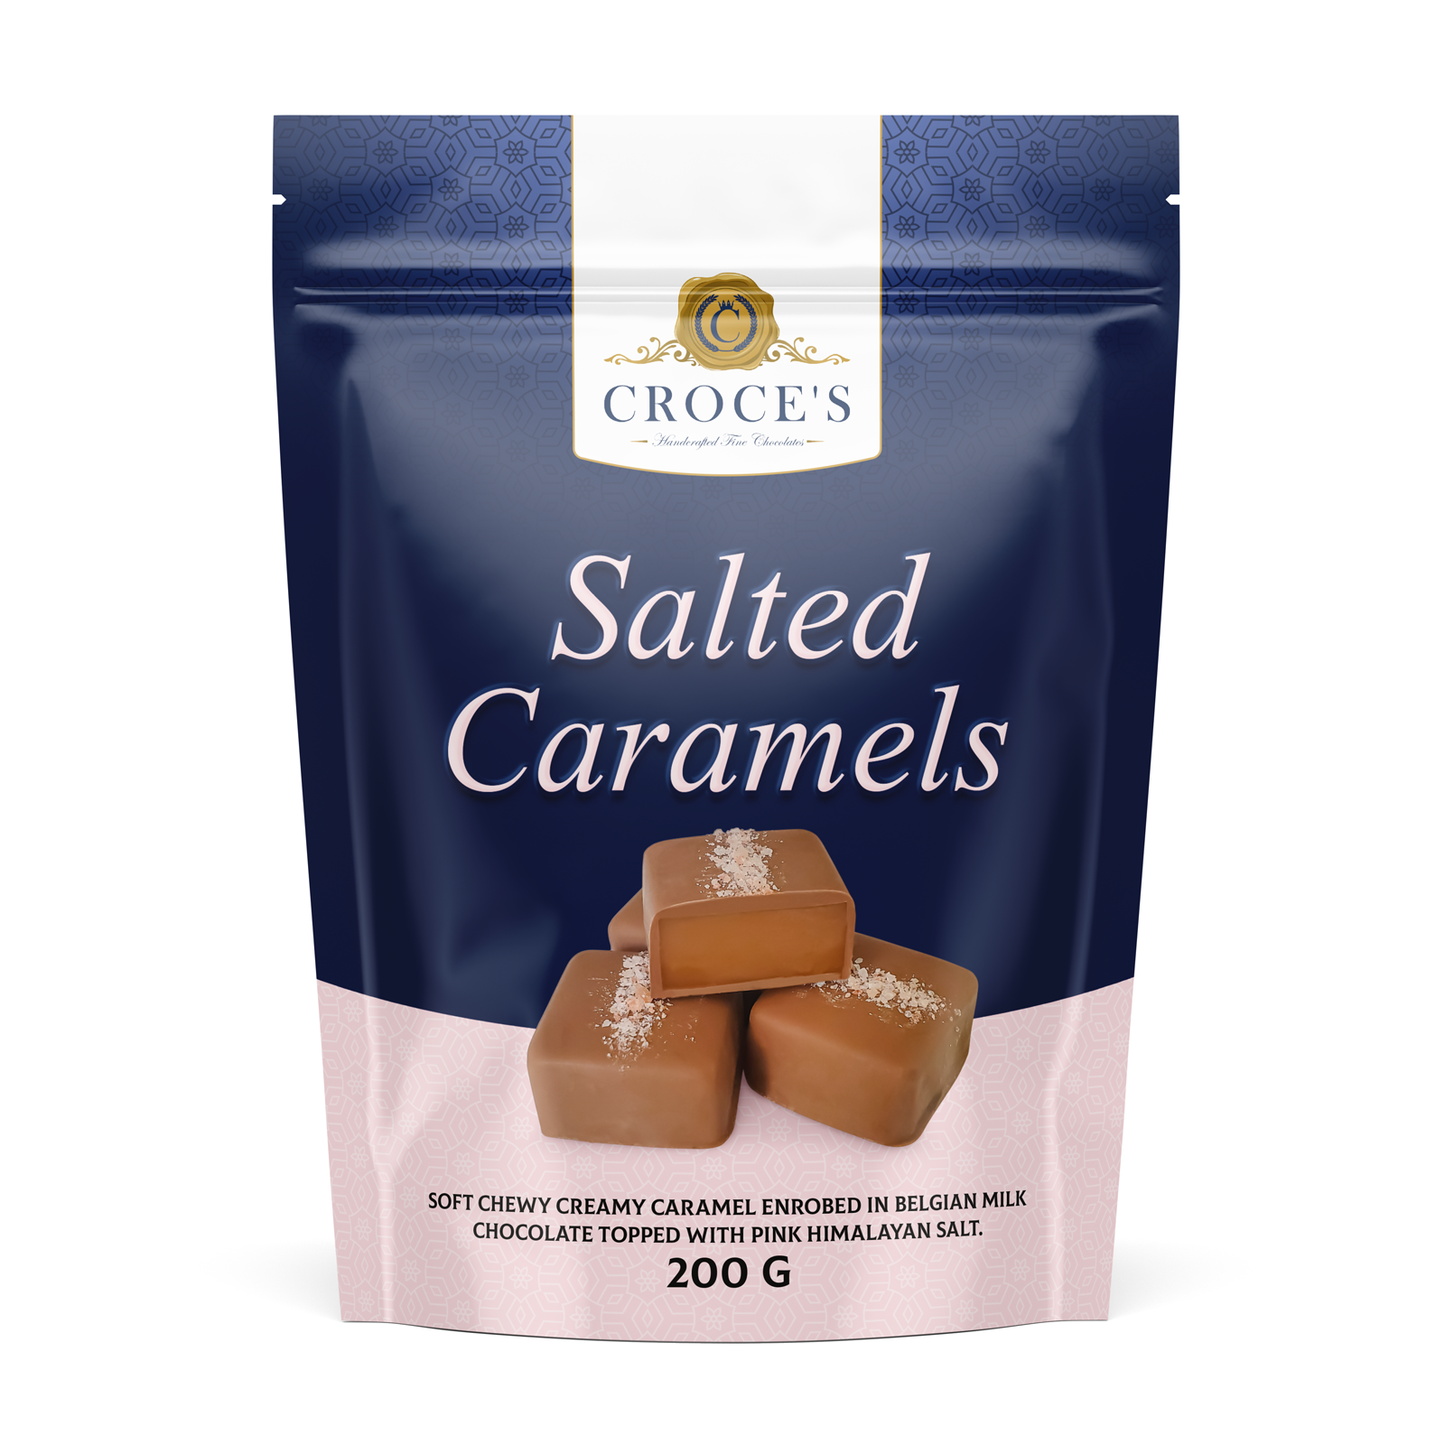 Croce's Salted Caramels, Soft Caramel, Chewy Caramel, Sweet and salty, creamy caramel, Caramel gift, Salted Caramels, Gourmet Caramels